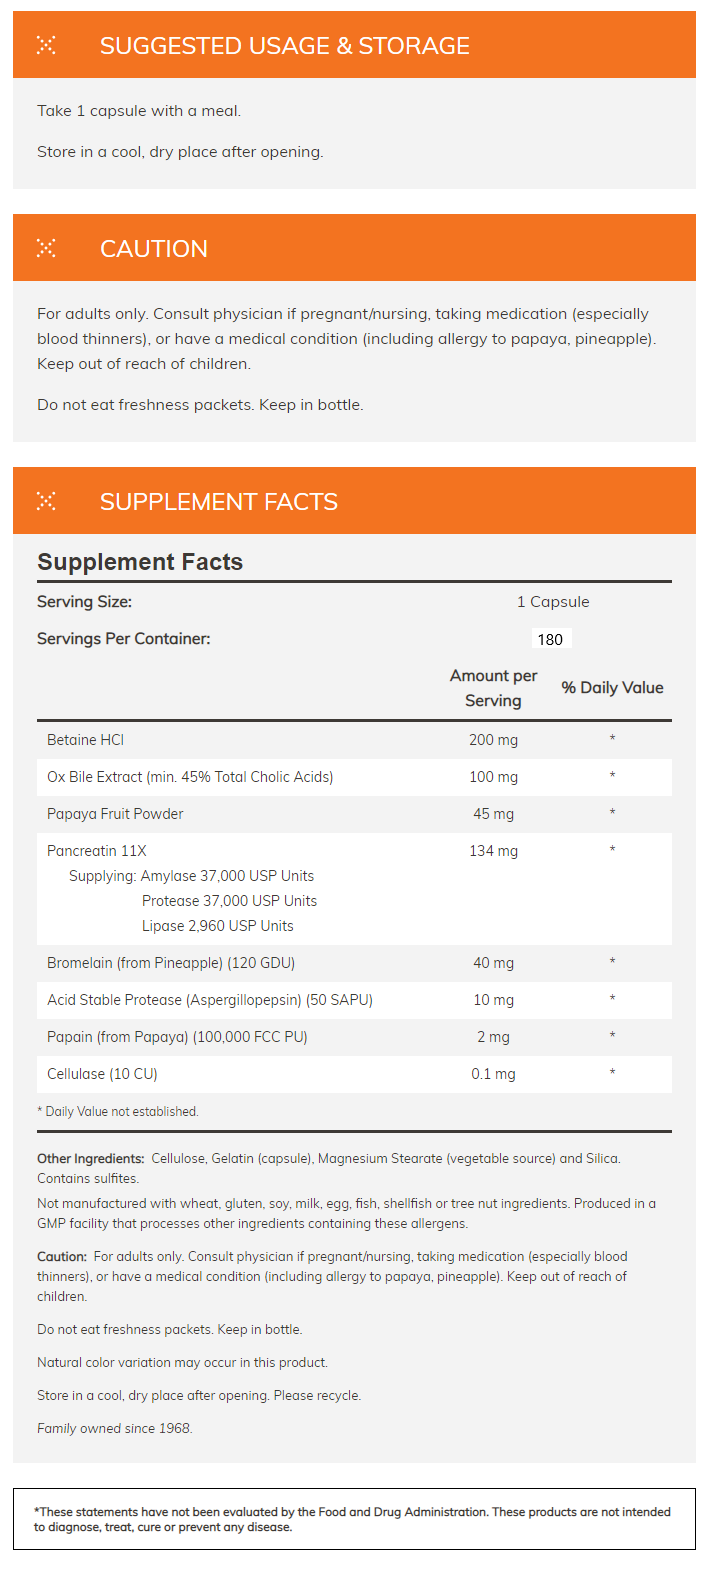 Supplement facts displaying betaine HCl, ox bile extract, papaya fruit powder, pancreatin, bromelain, acid stable protease, and other ingredients.